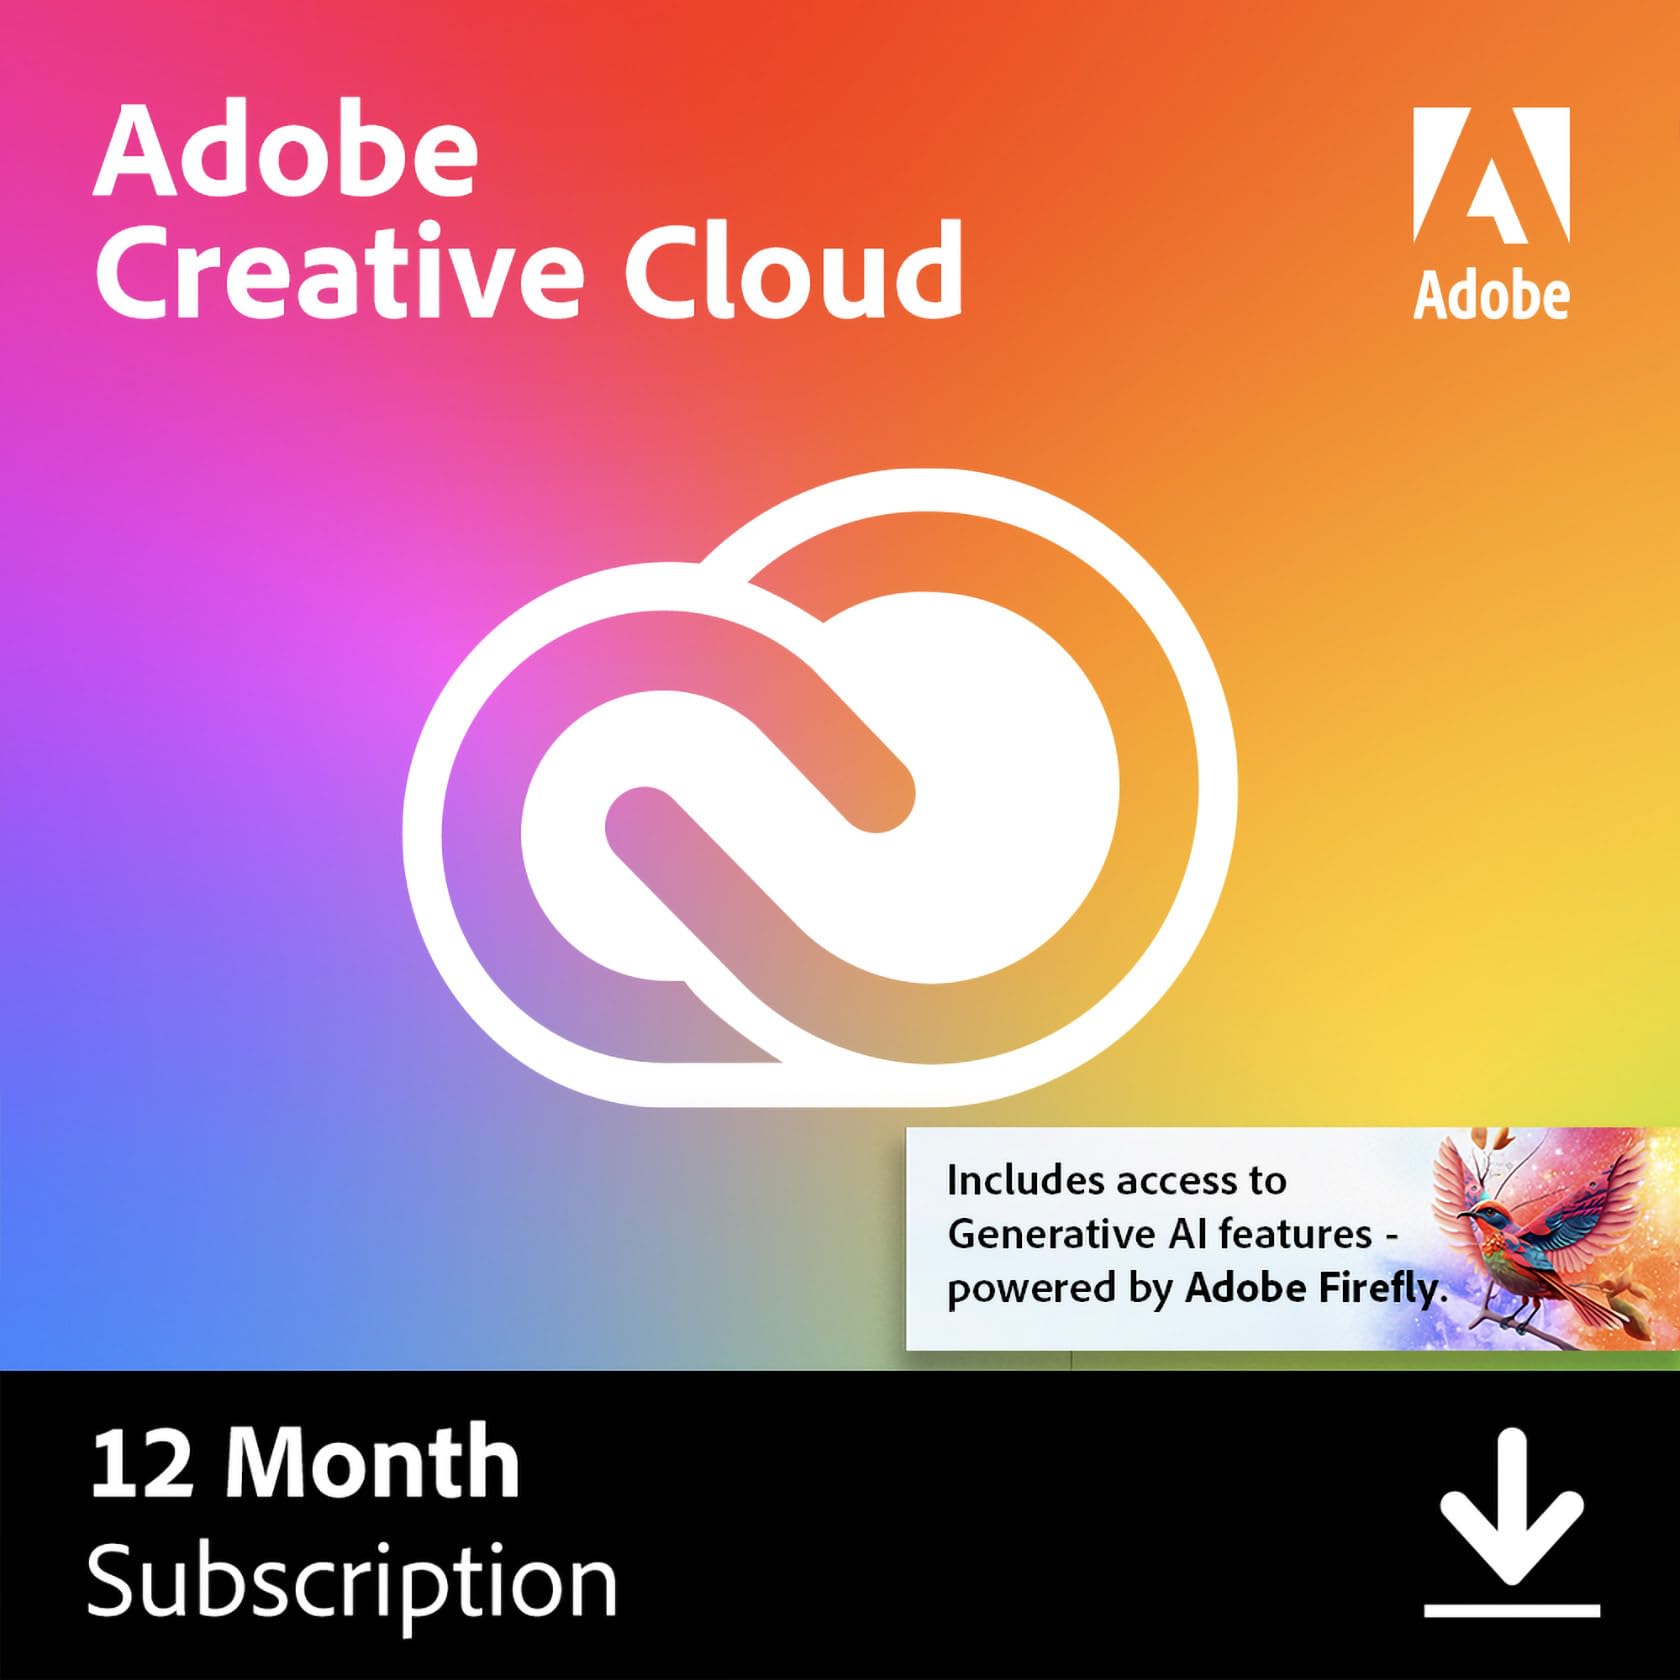 Updating Creative Cloud and Windows 10